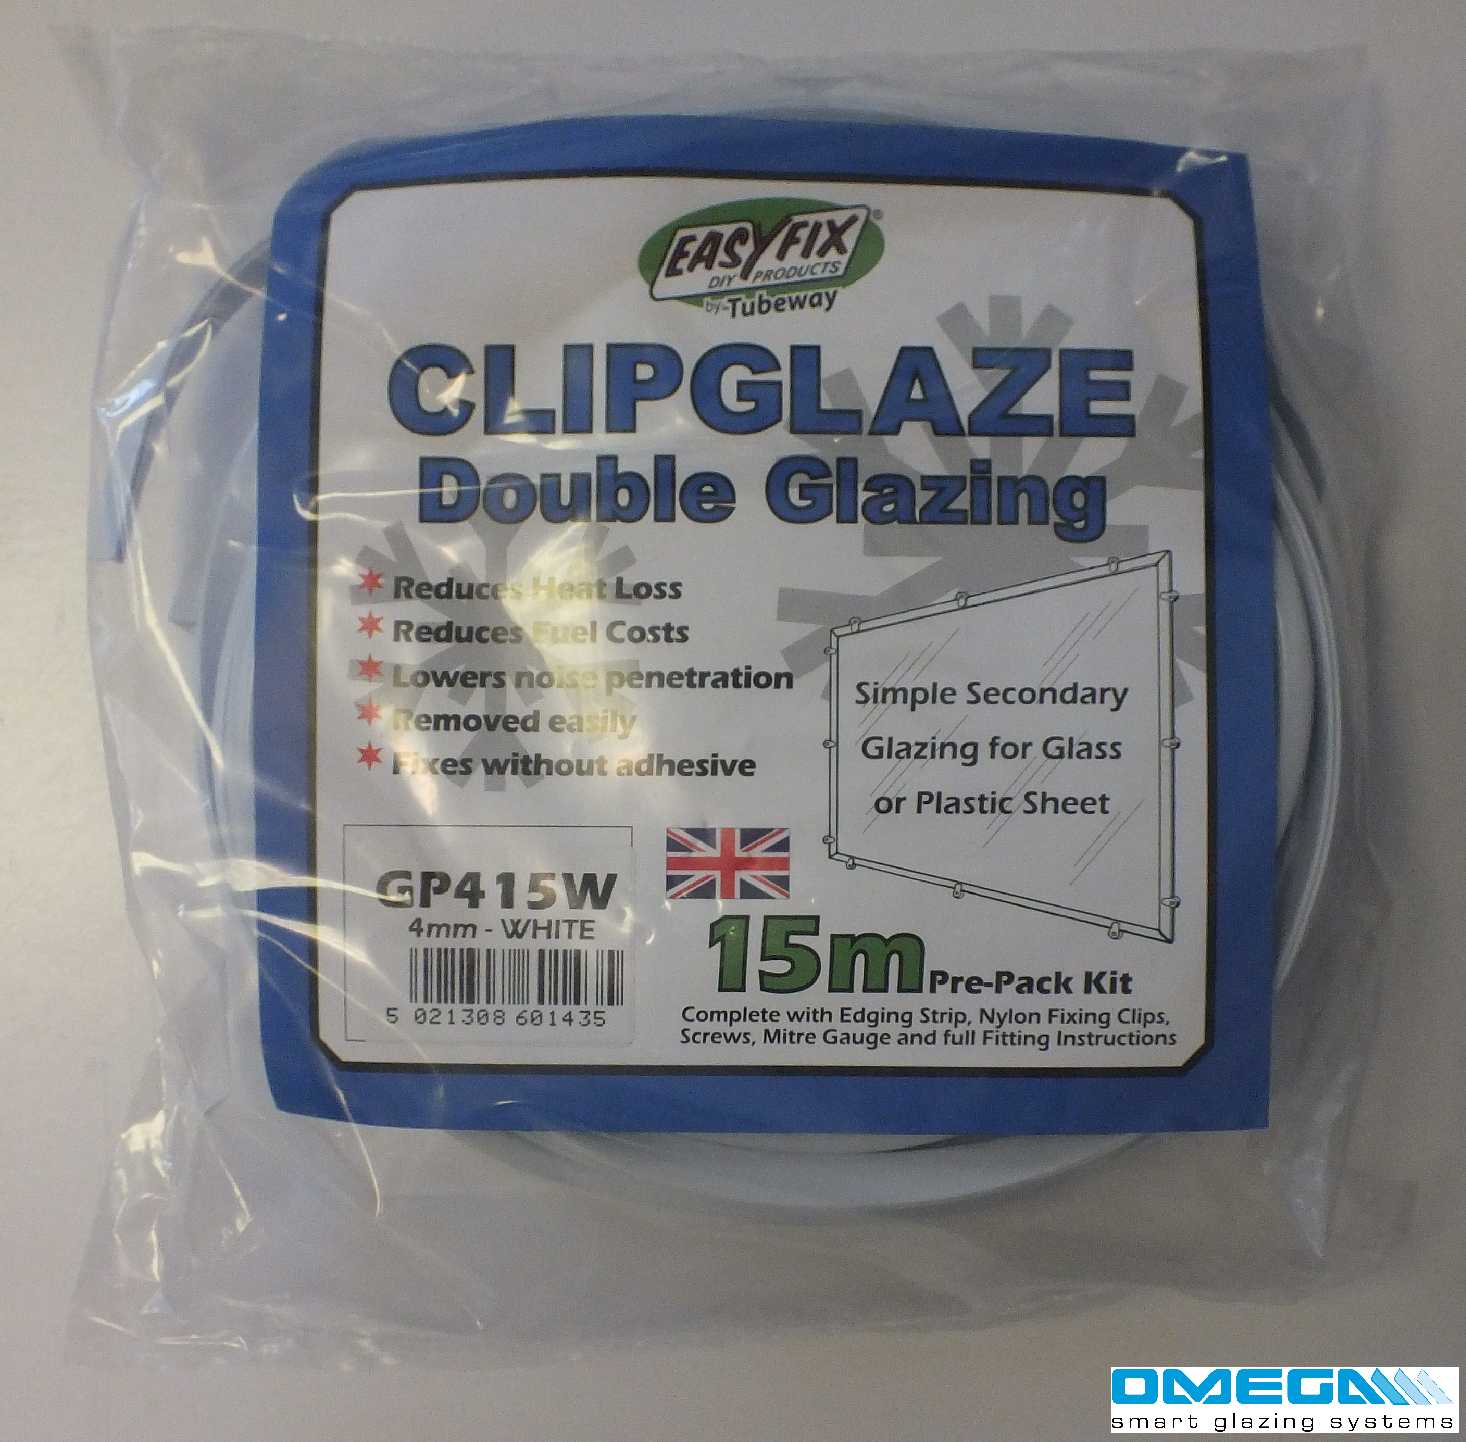 Great deals on Easyfix Clipglaze Edging Kit - 15m roll of edging for 3mm Glazing Thickness, White, Clear or Brown